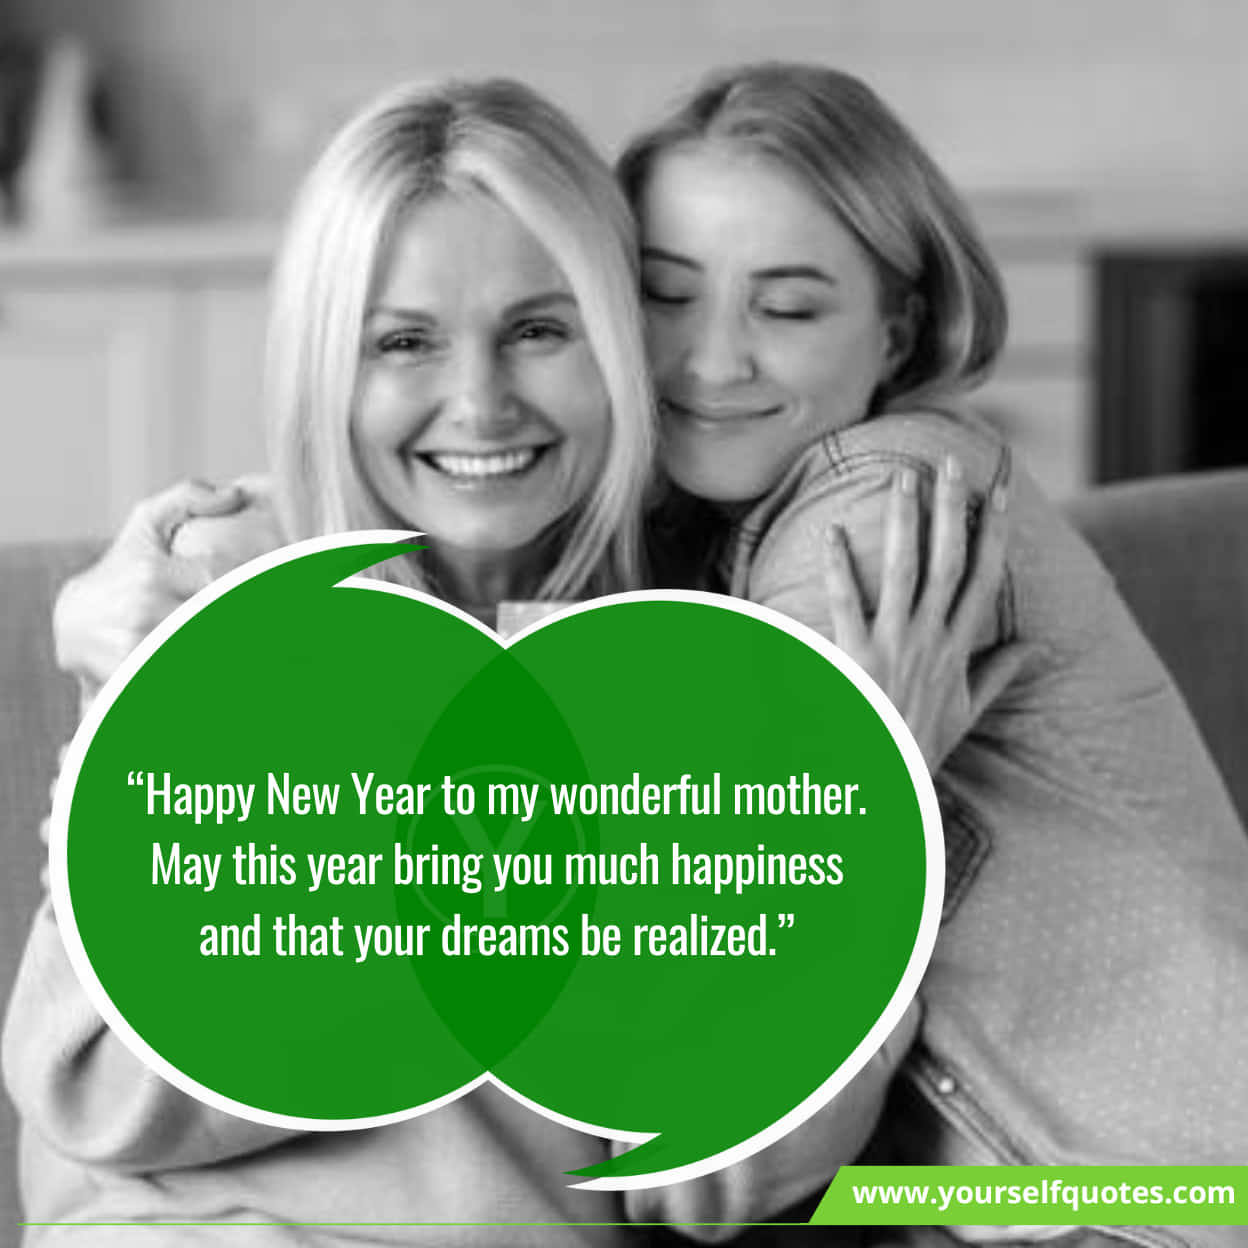 New Year Quotes for Your Mother